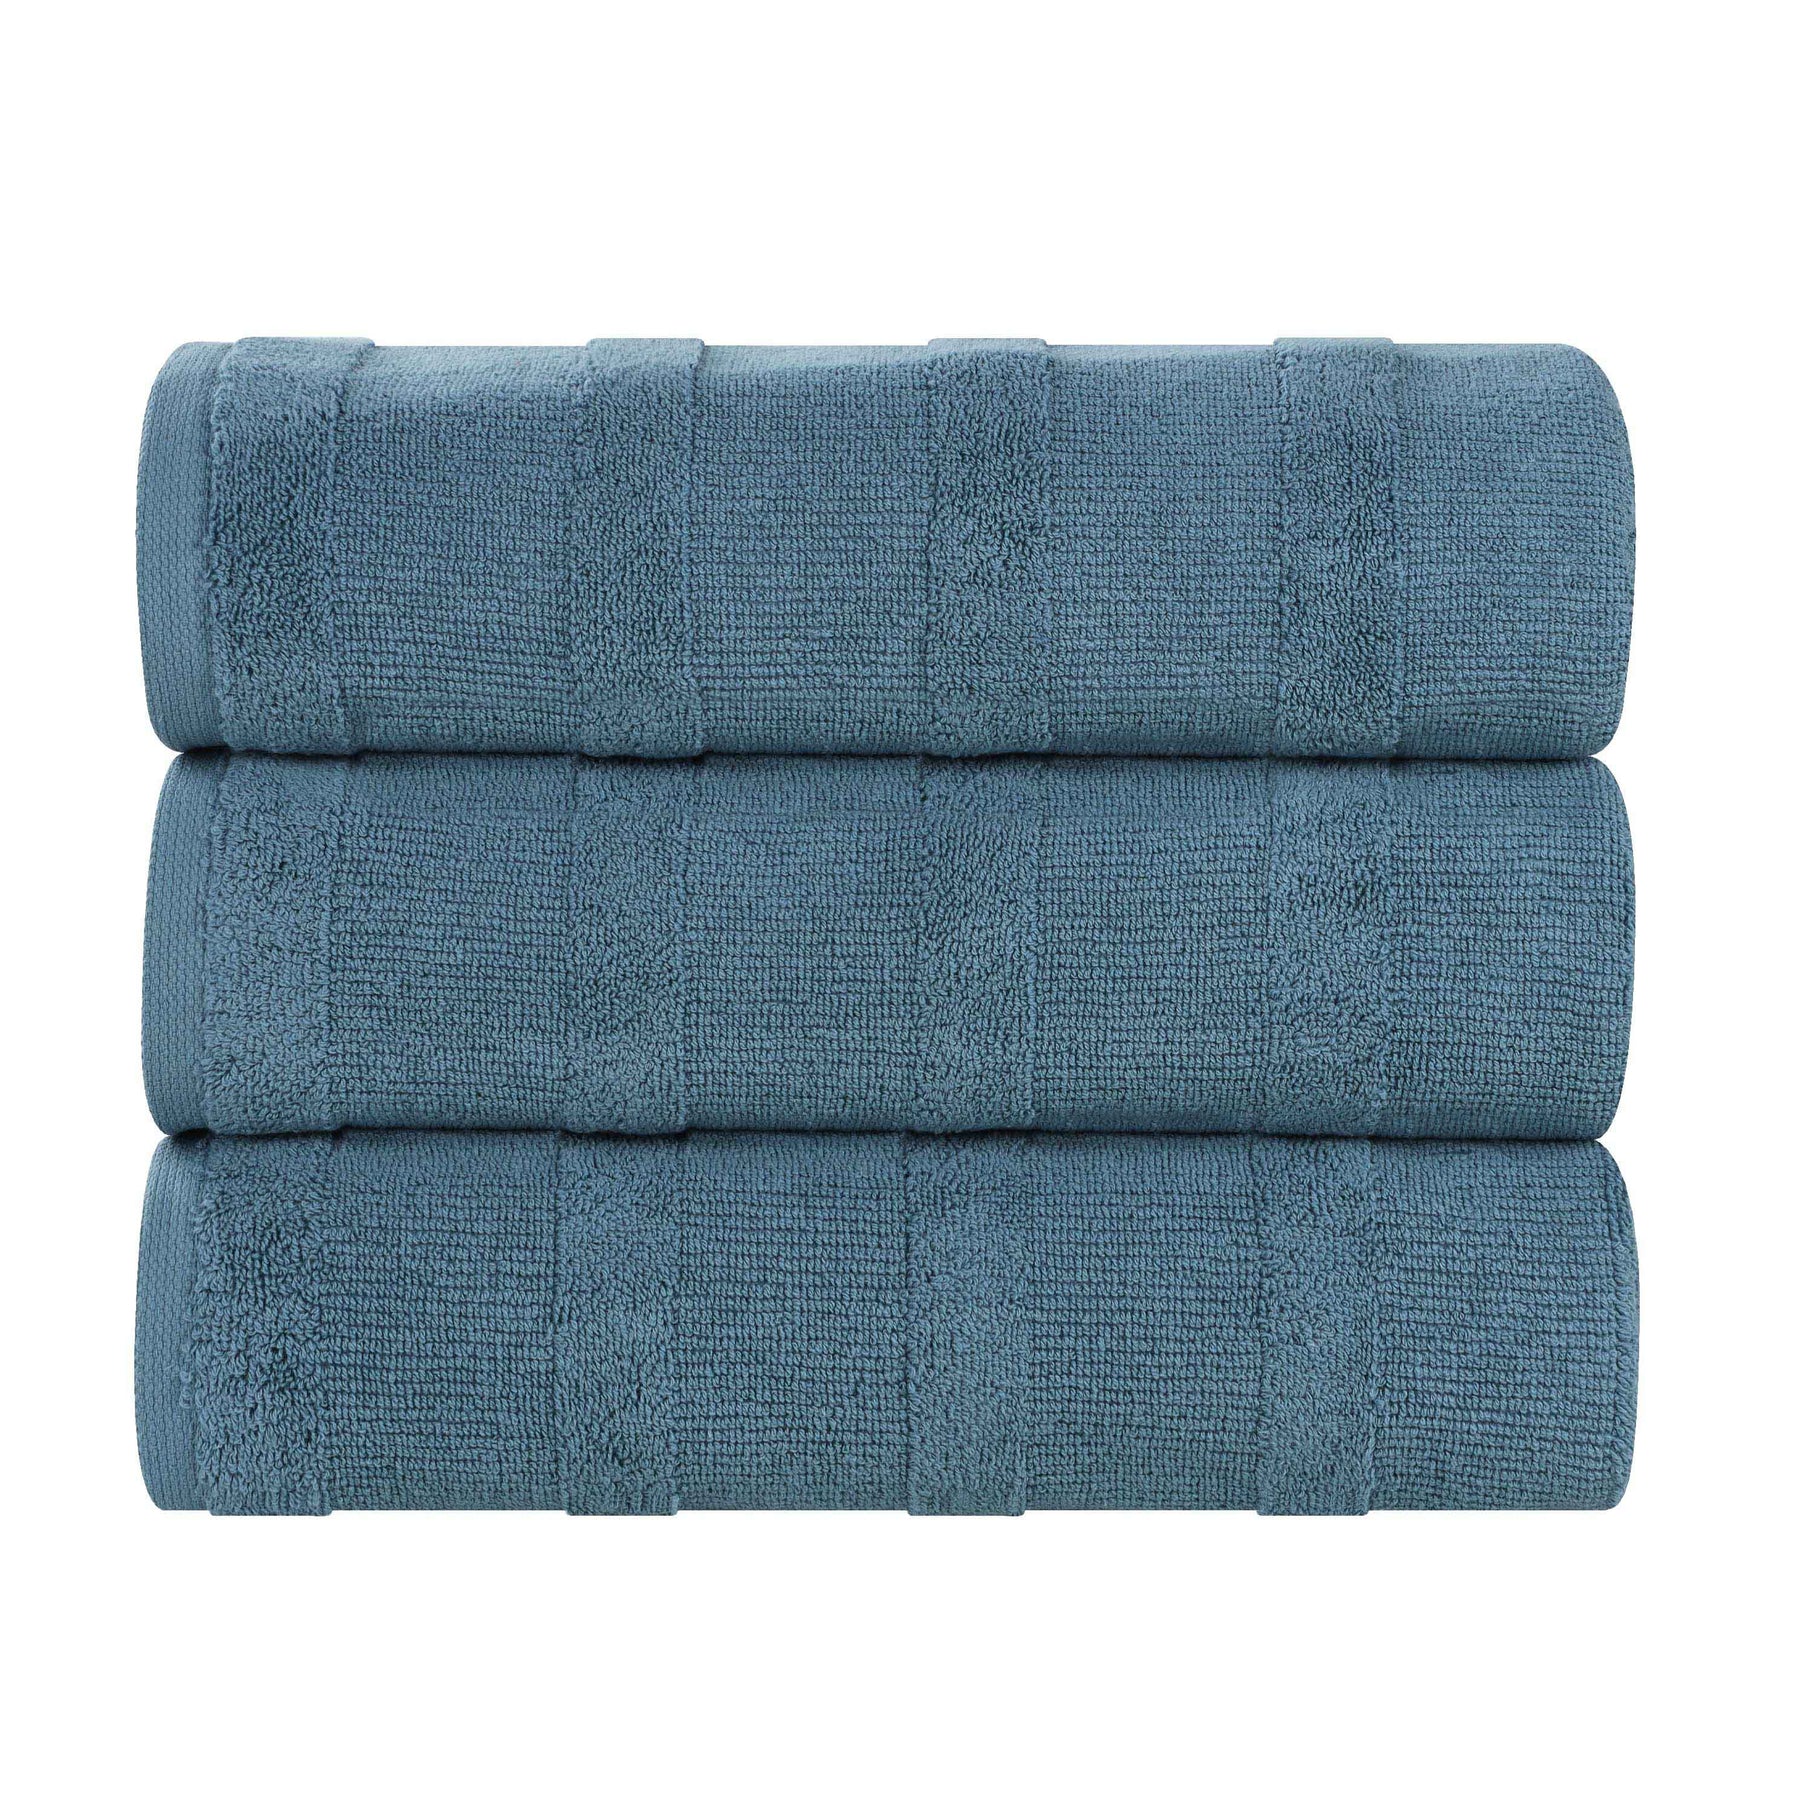 Roma Cotton Ribbed Textured Soft Highly Absorbent Bath Towel - Denim Blue